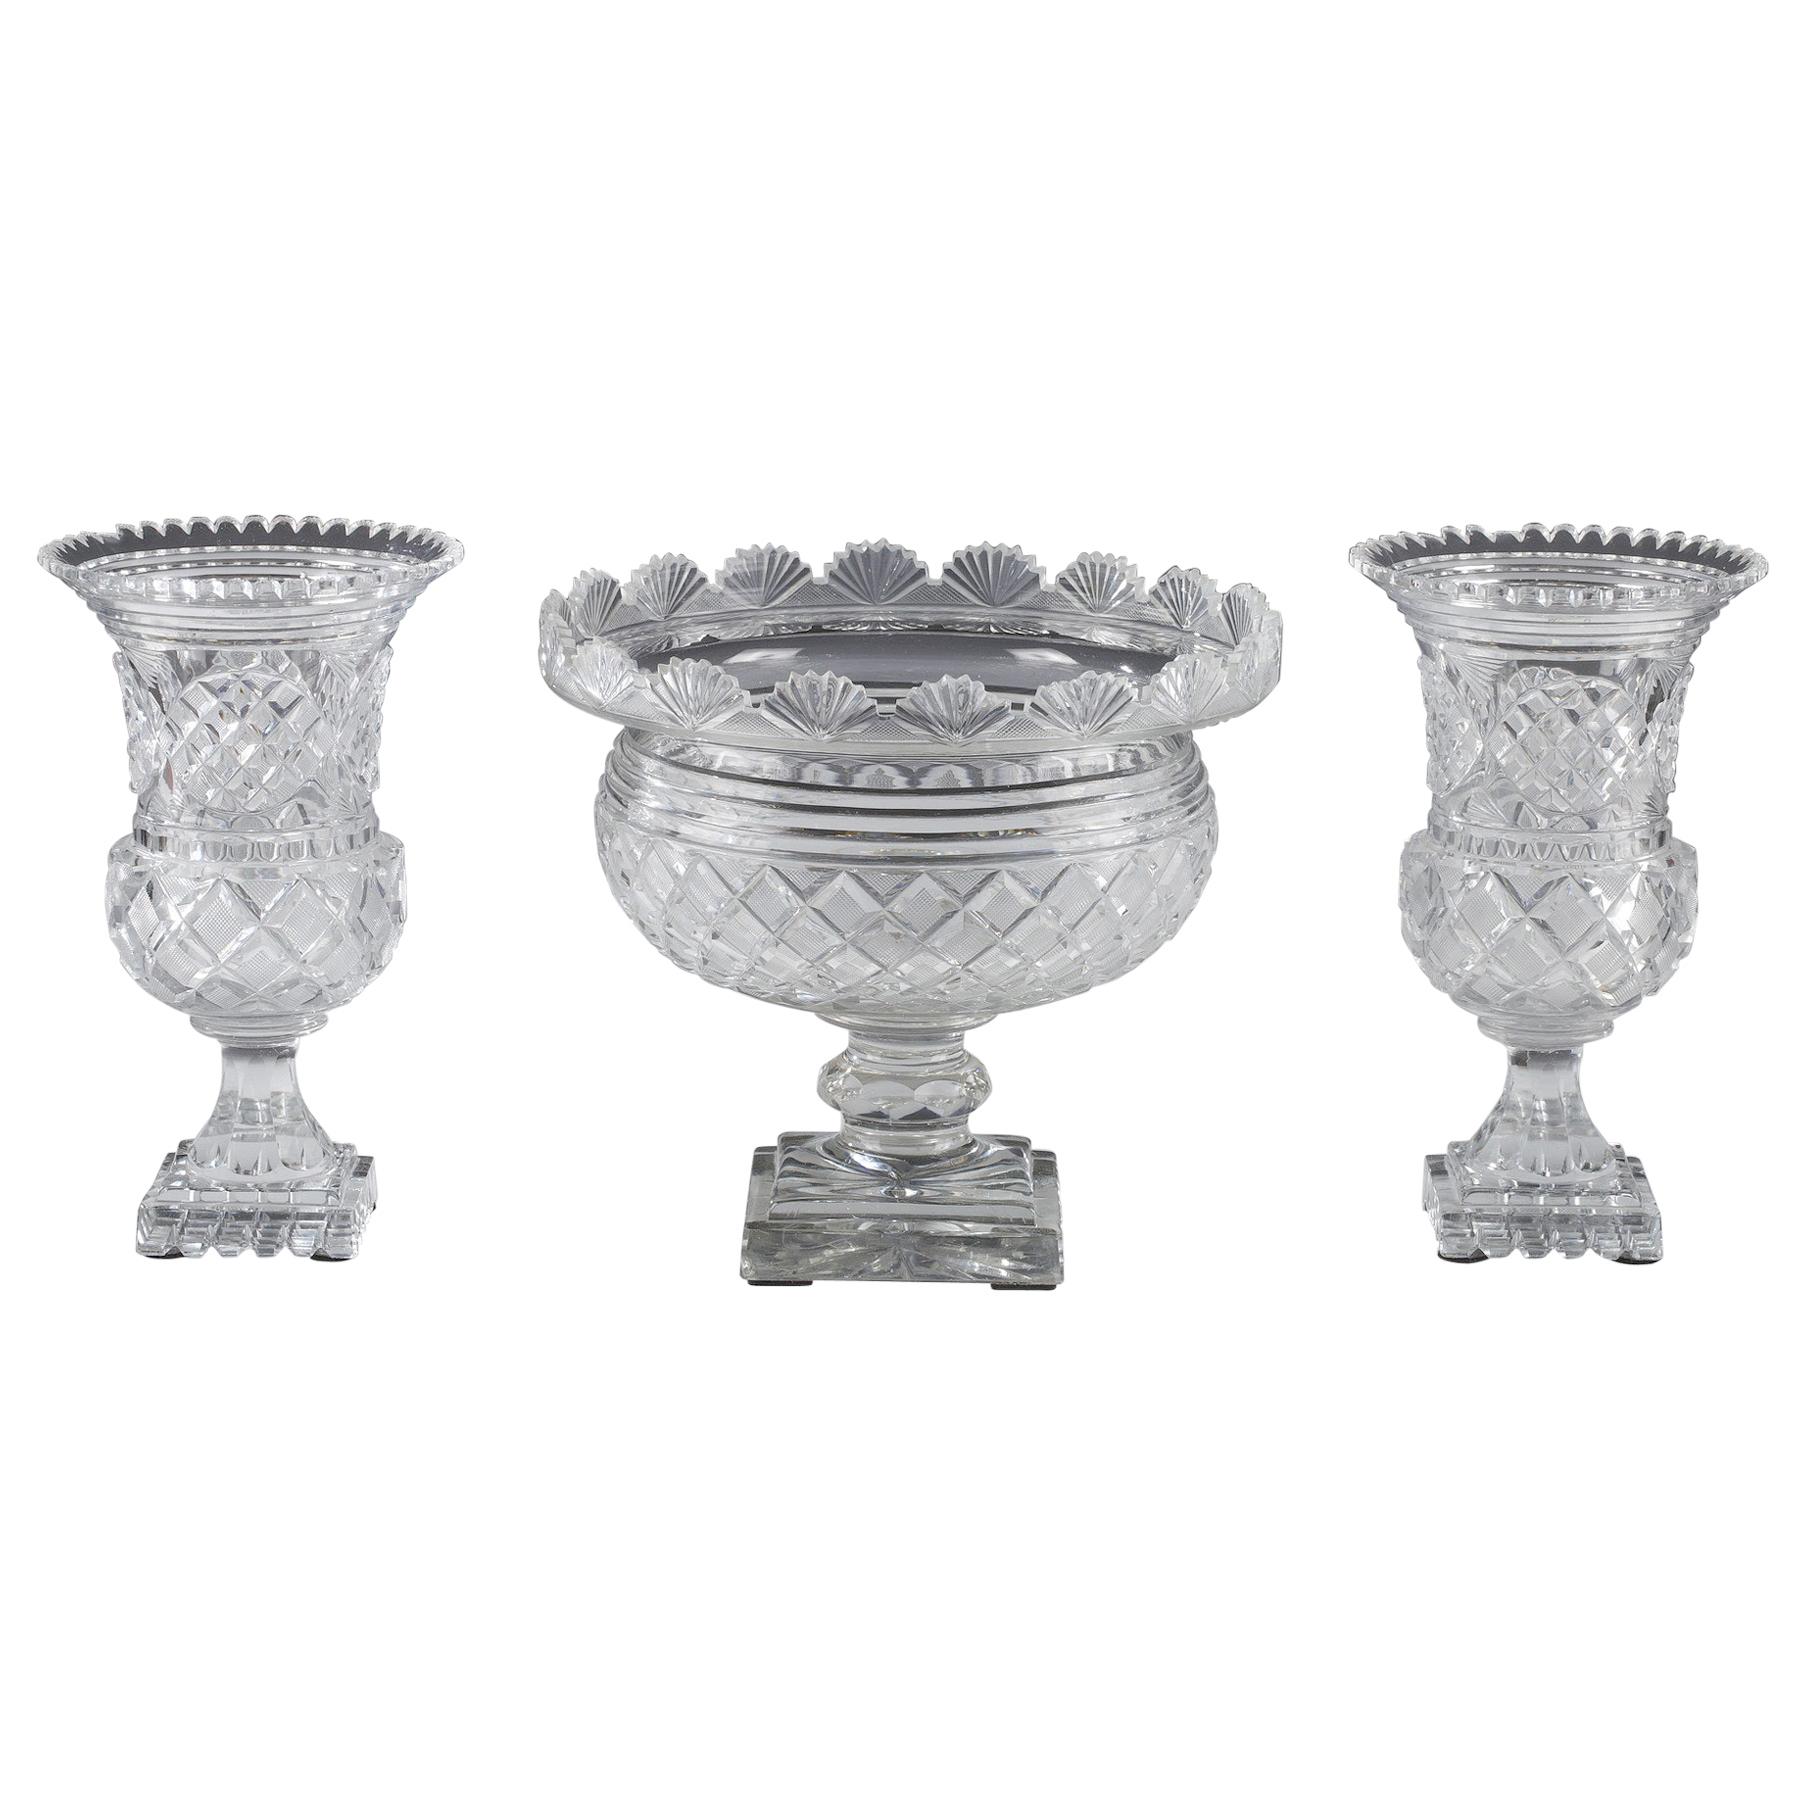 Set of Cut Crystal Vases Attributed to Baccarat, France, Circa 1880